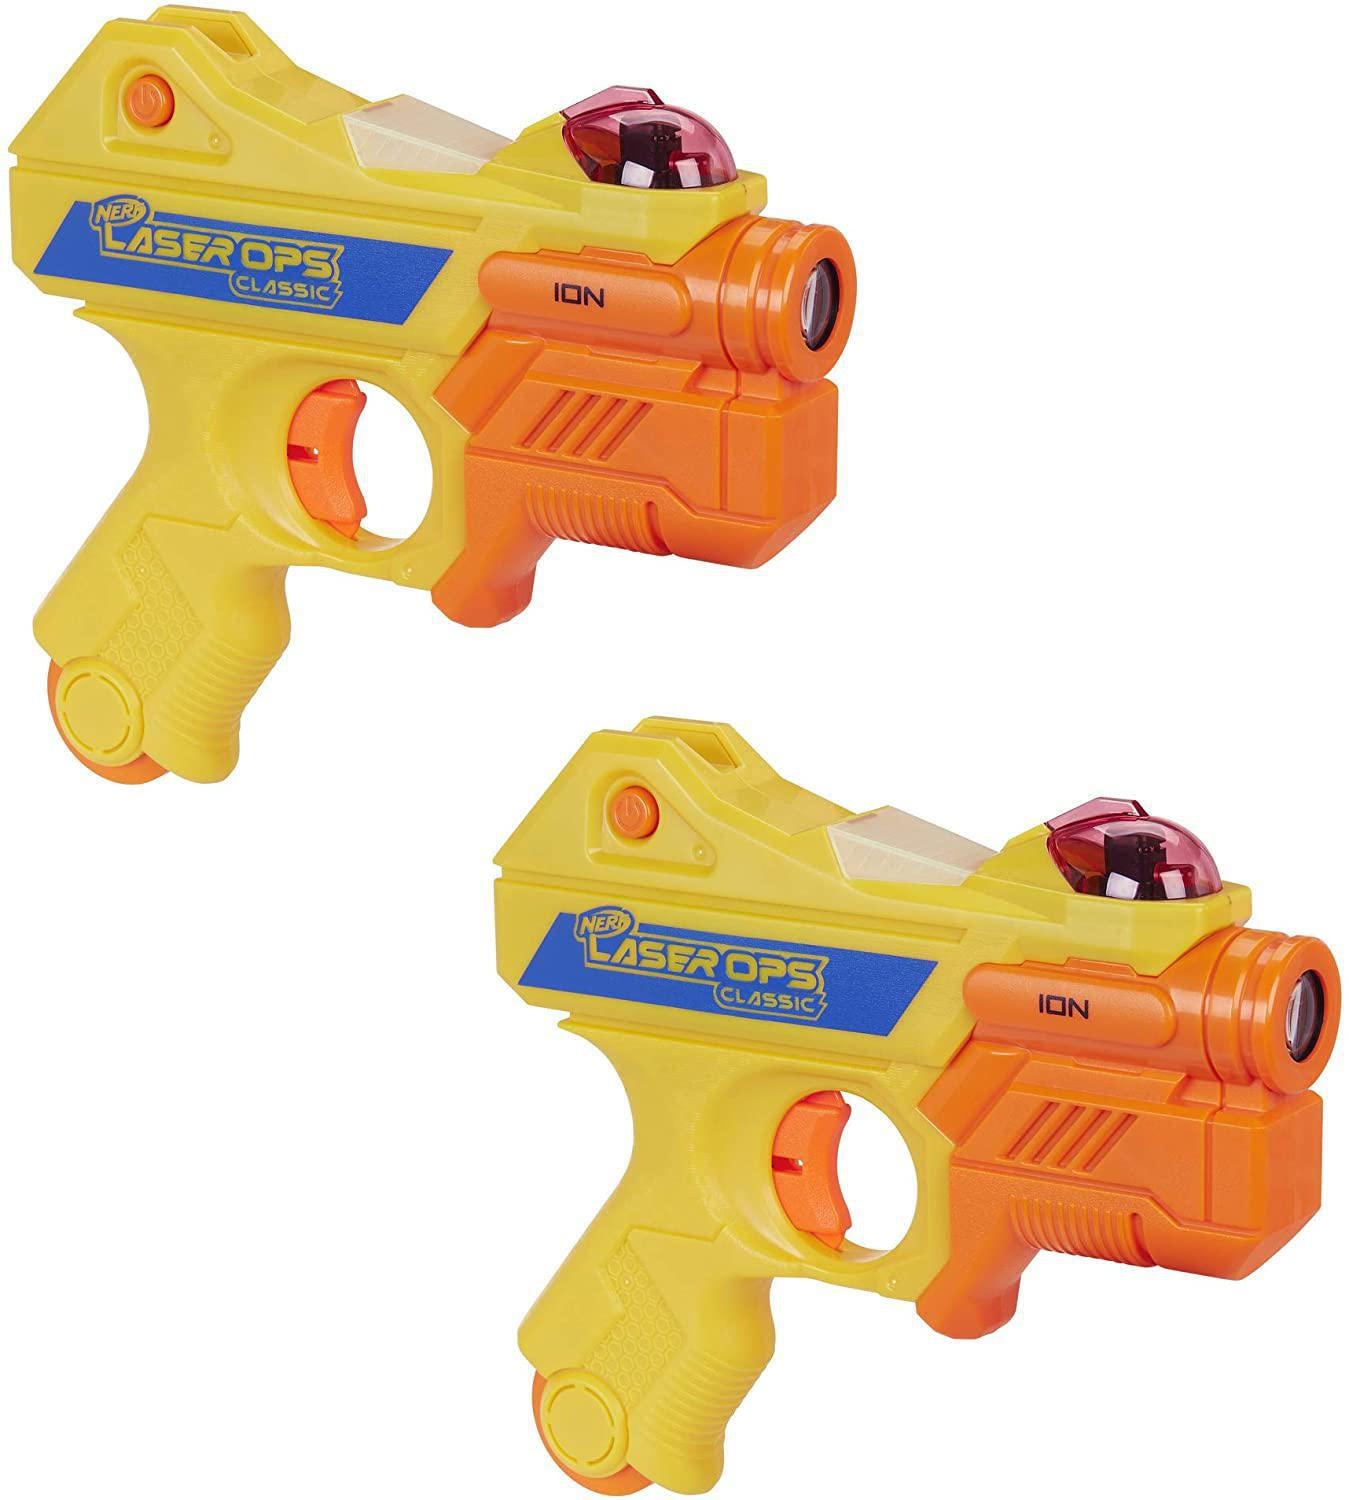 Kids NERF Laser Ops Classic Ion Blaster 2 Pack With Light and sound effects, unlimited ammo, Great Gift For Birthday